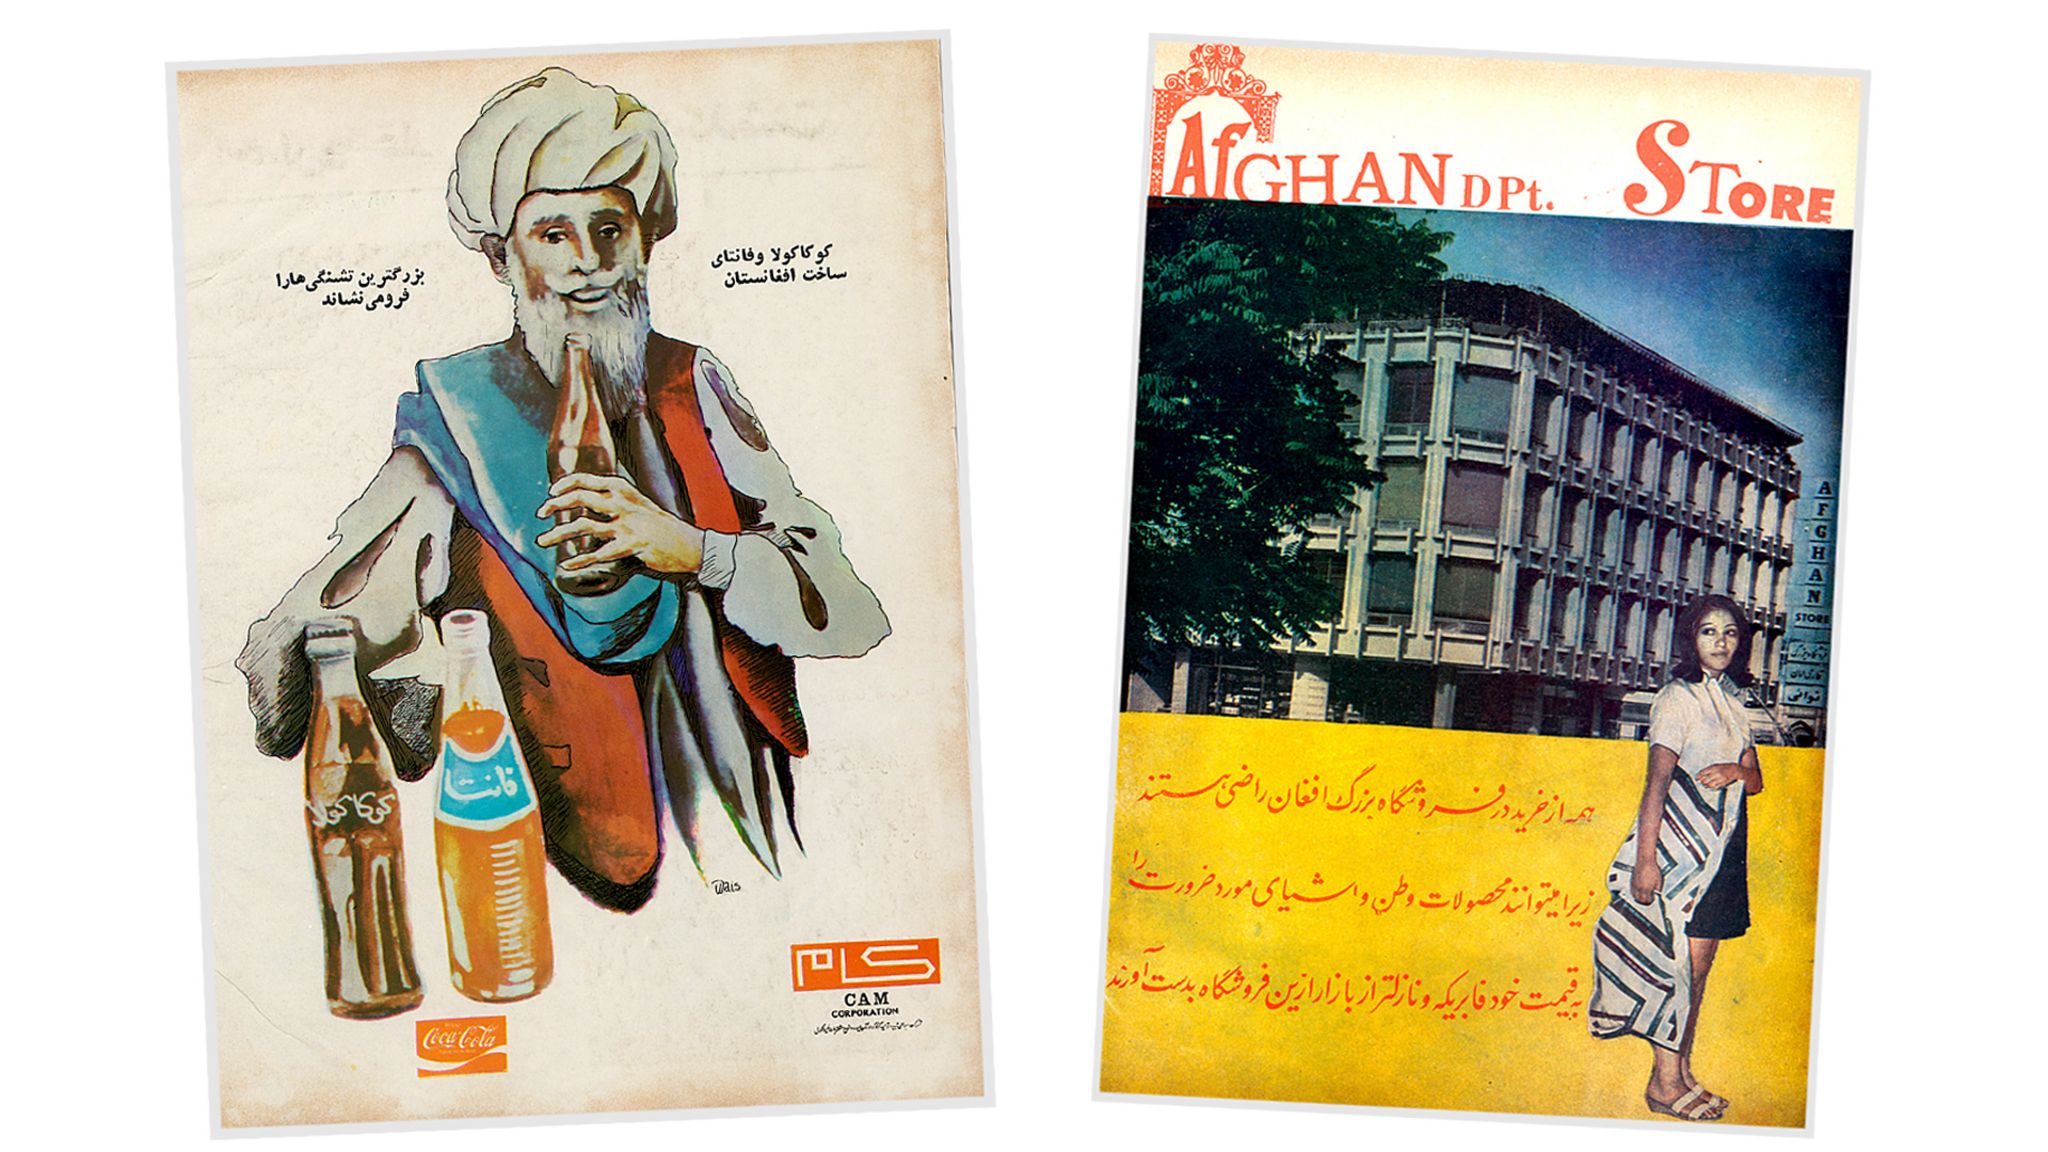 Pages from Afghan magazine Zhvandun - soft drink and department store advert